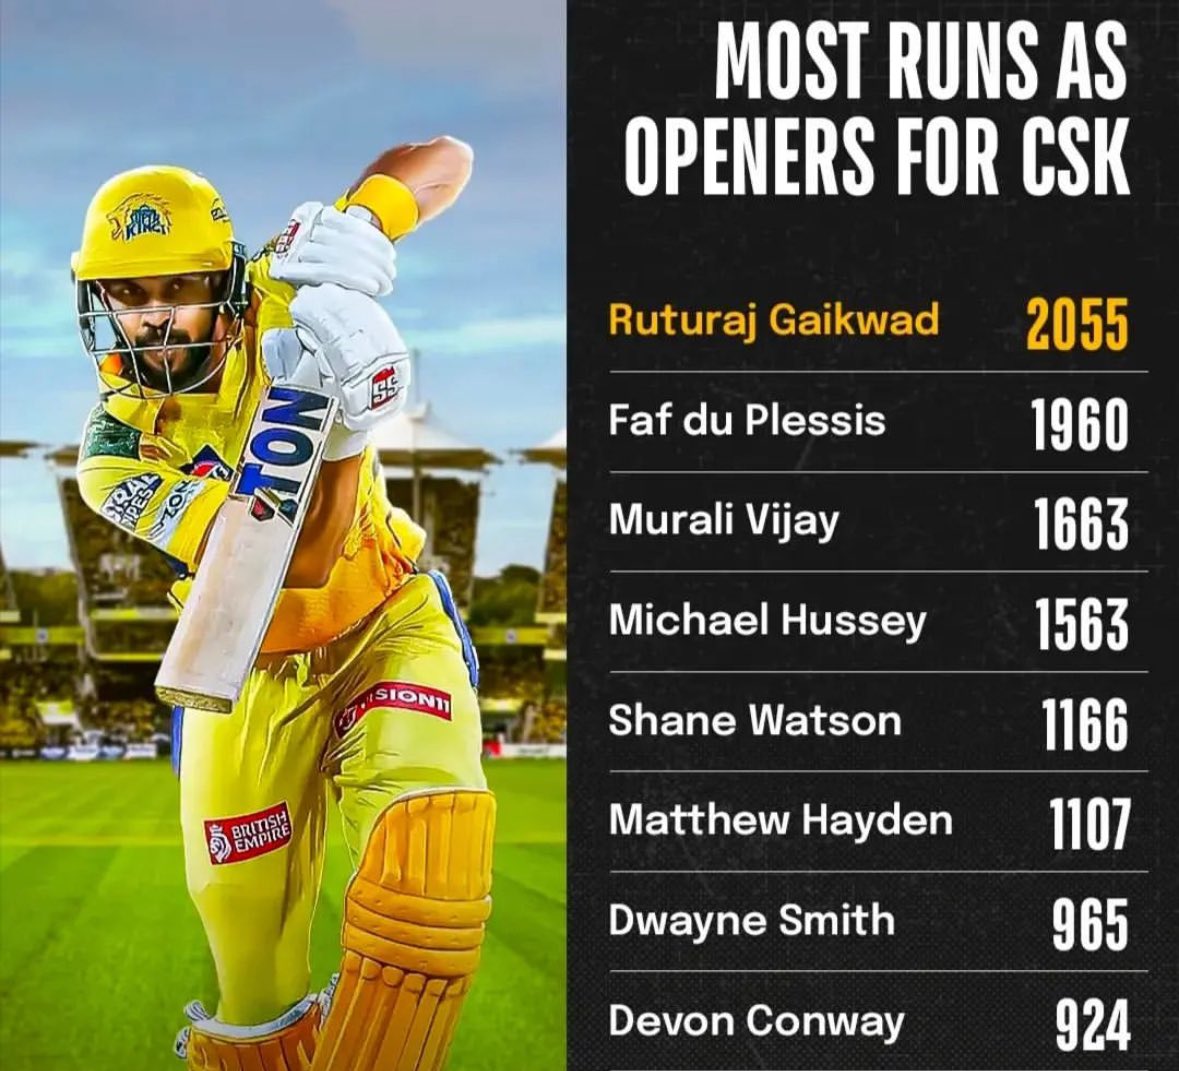 Look at the numbers of Devon Conway man

He did not even play like 2 seasons fully yet

He was an unreal asset for us. Would have easily reached the levels of Mic Hussey had he played this season

Major major miss for CSK this season without any doubt